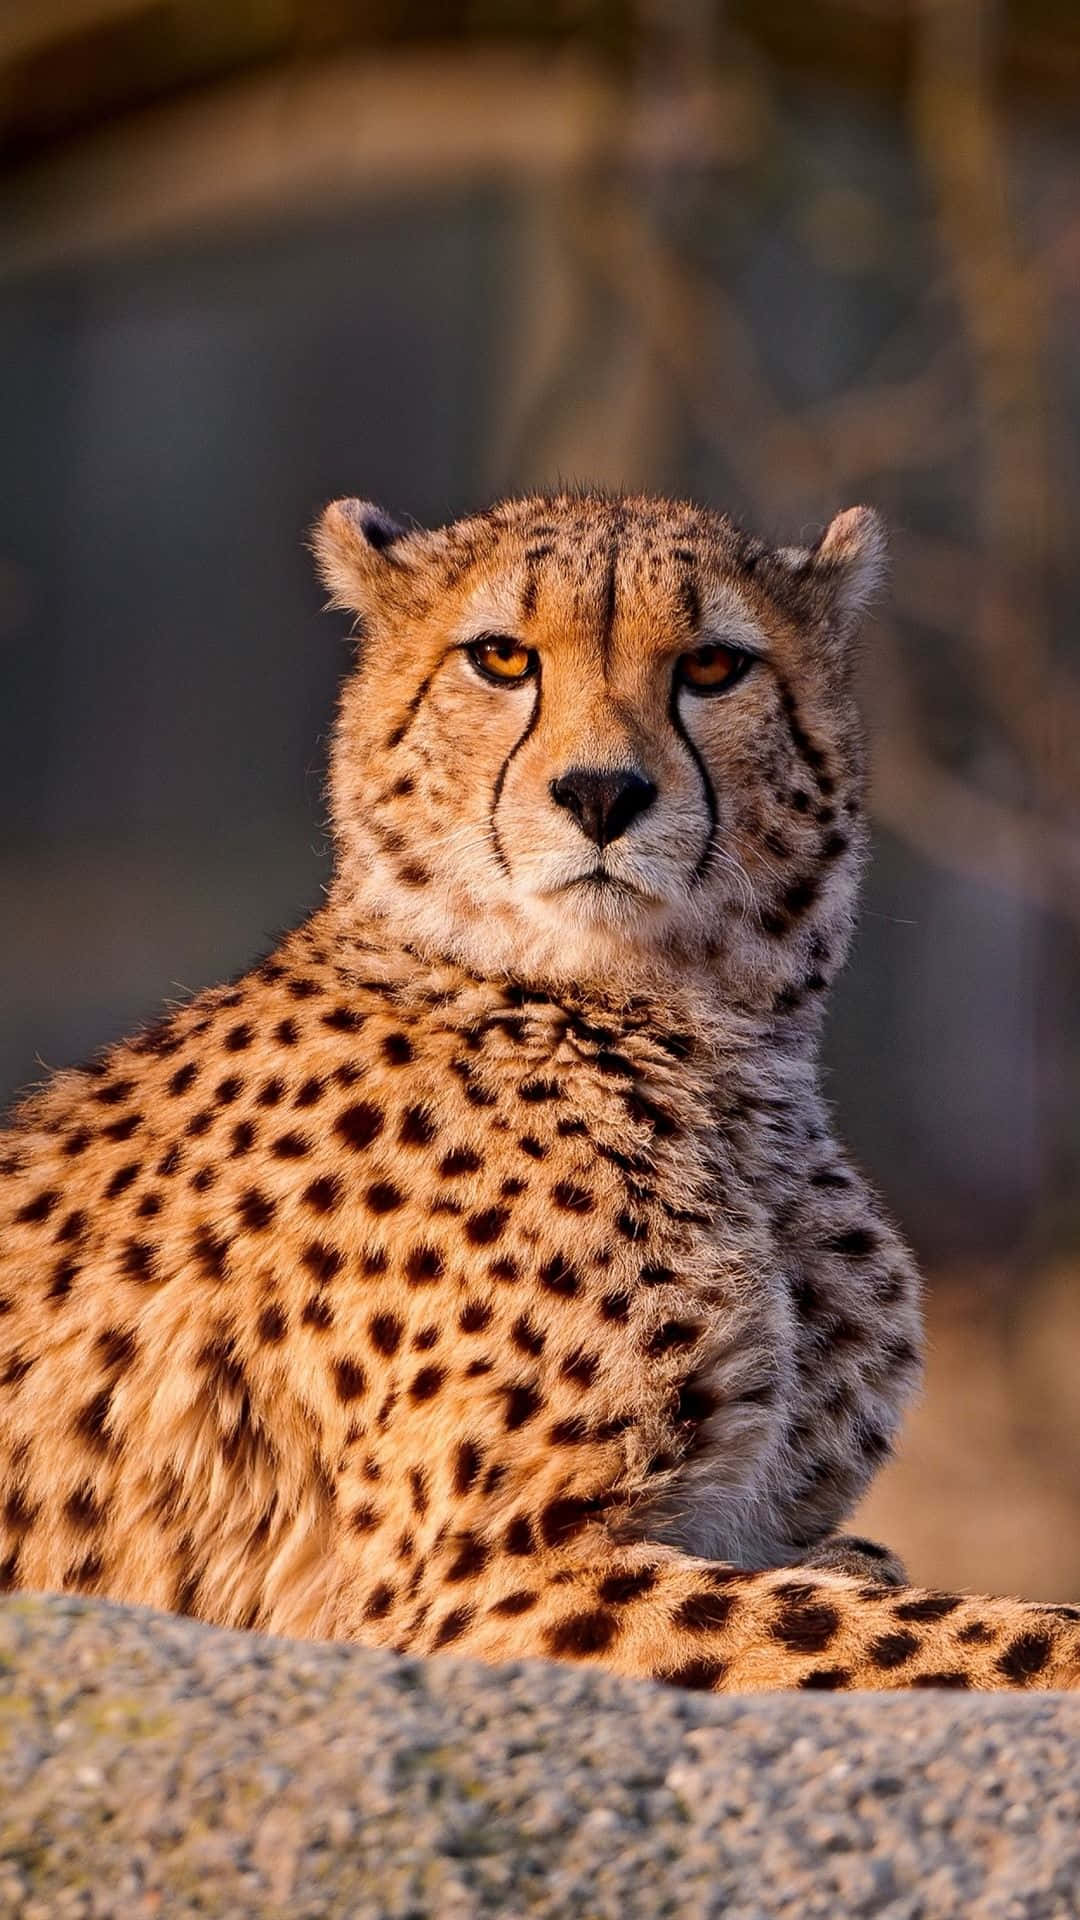 Upgrade your phone with the Cheetah Iphone and get ready to explore Wallpaper